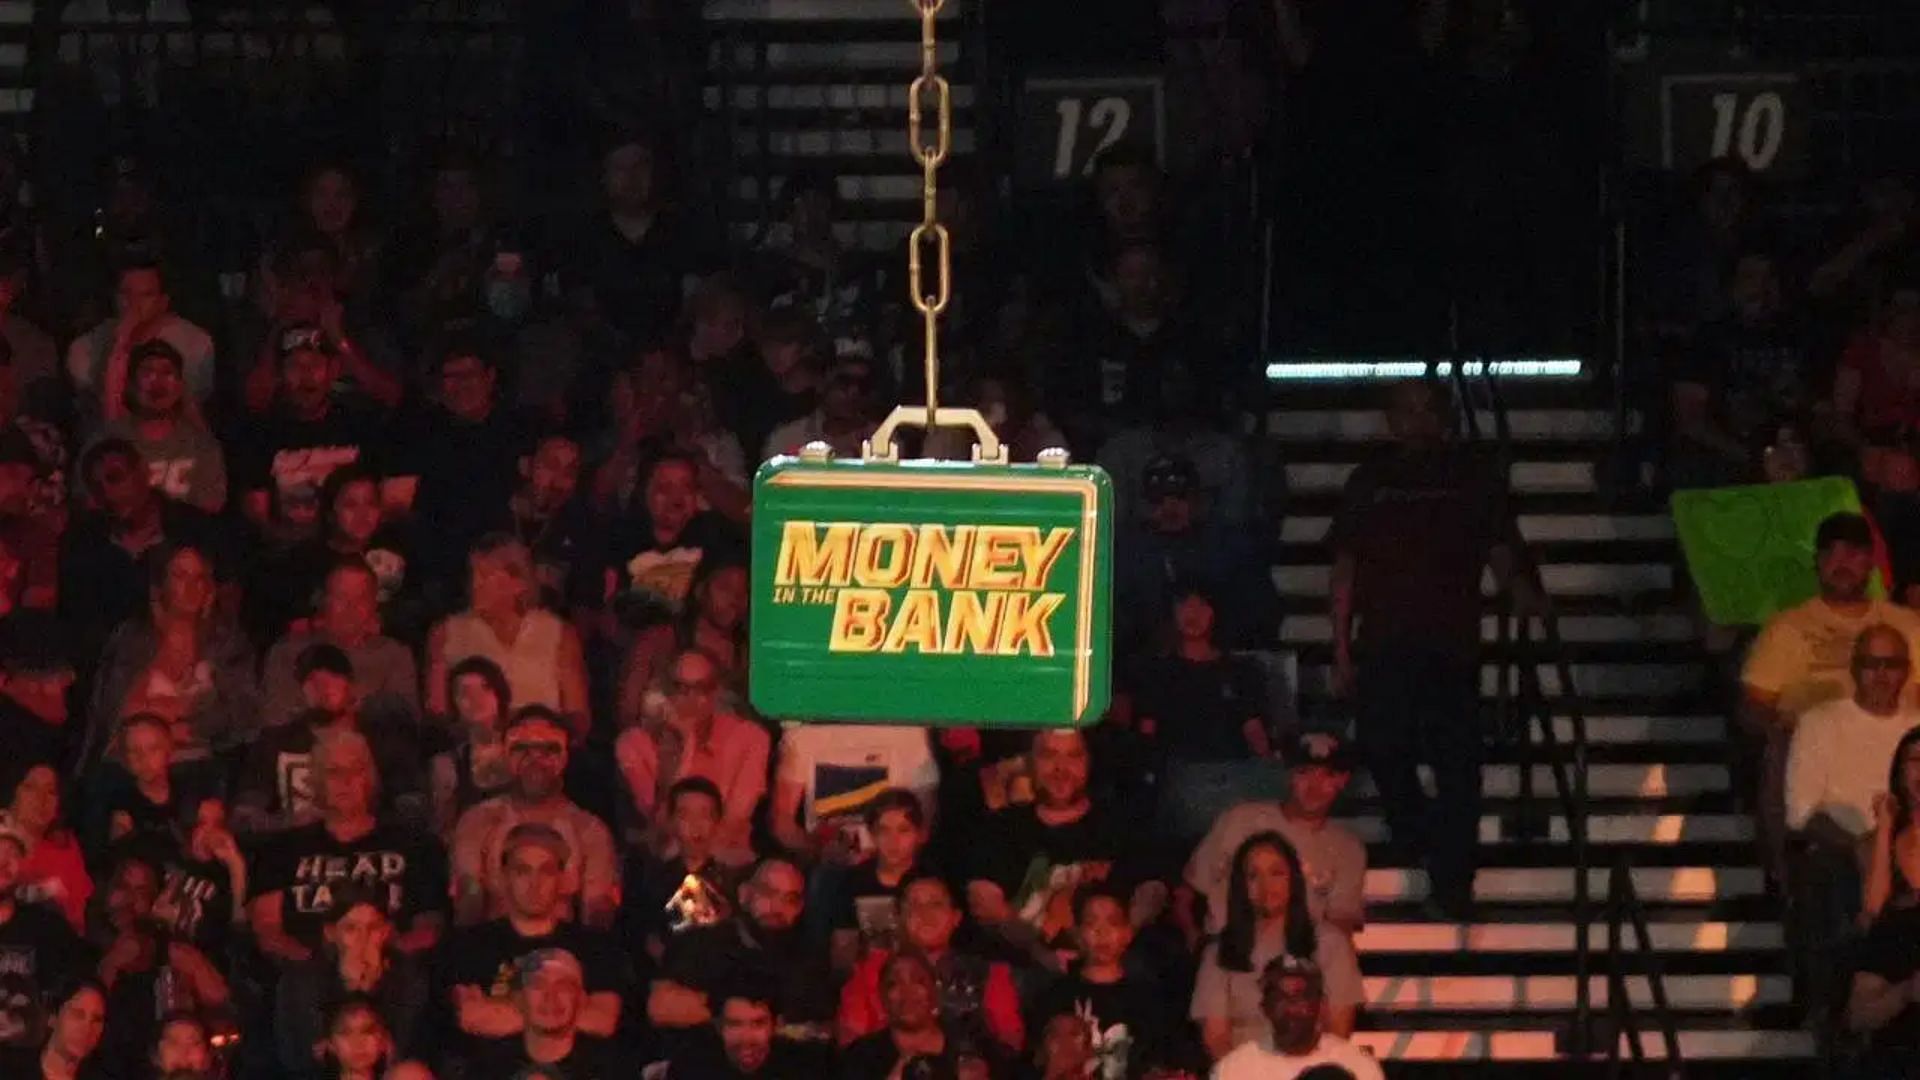 Money in the Bank was first introduced by WWE in 2005!